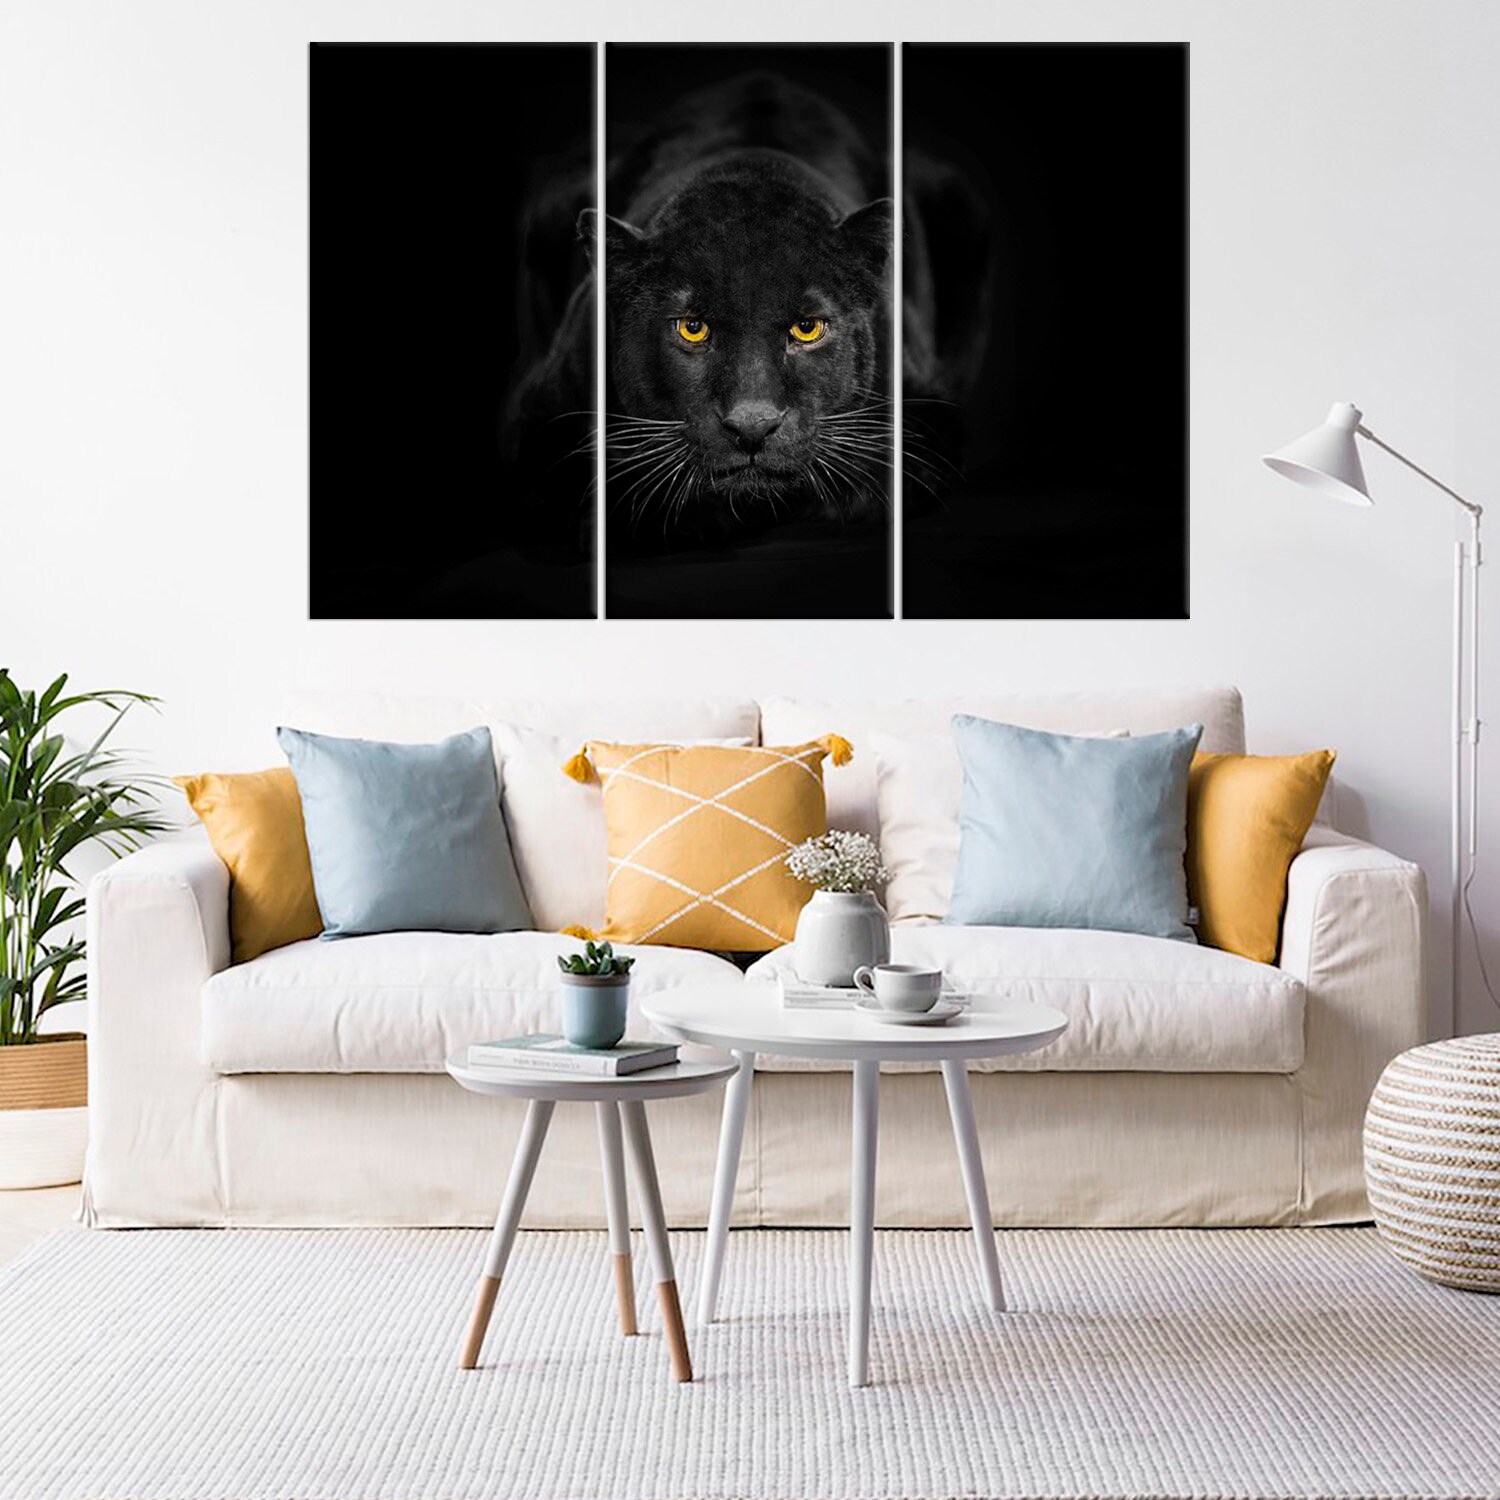 Black Panther Framed Canvas Print Animal Wall Art Leopard Wild | Etsy